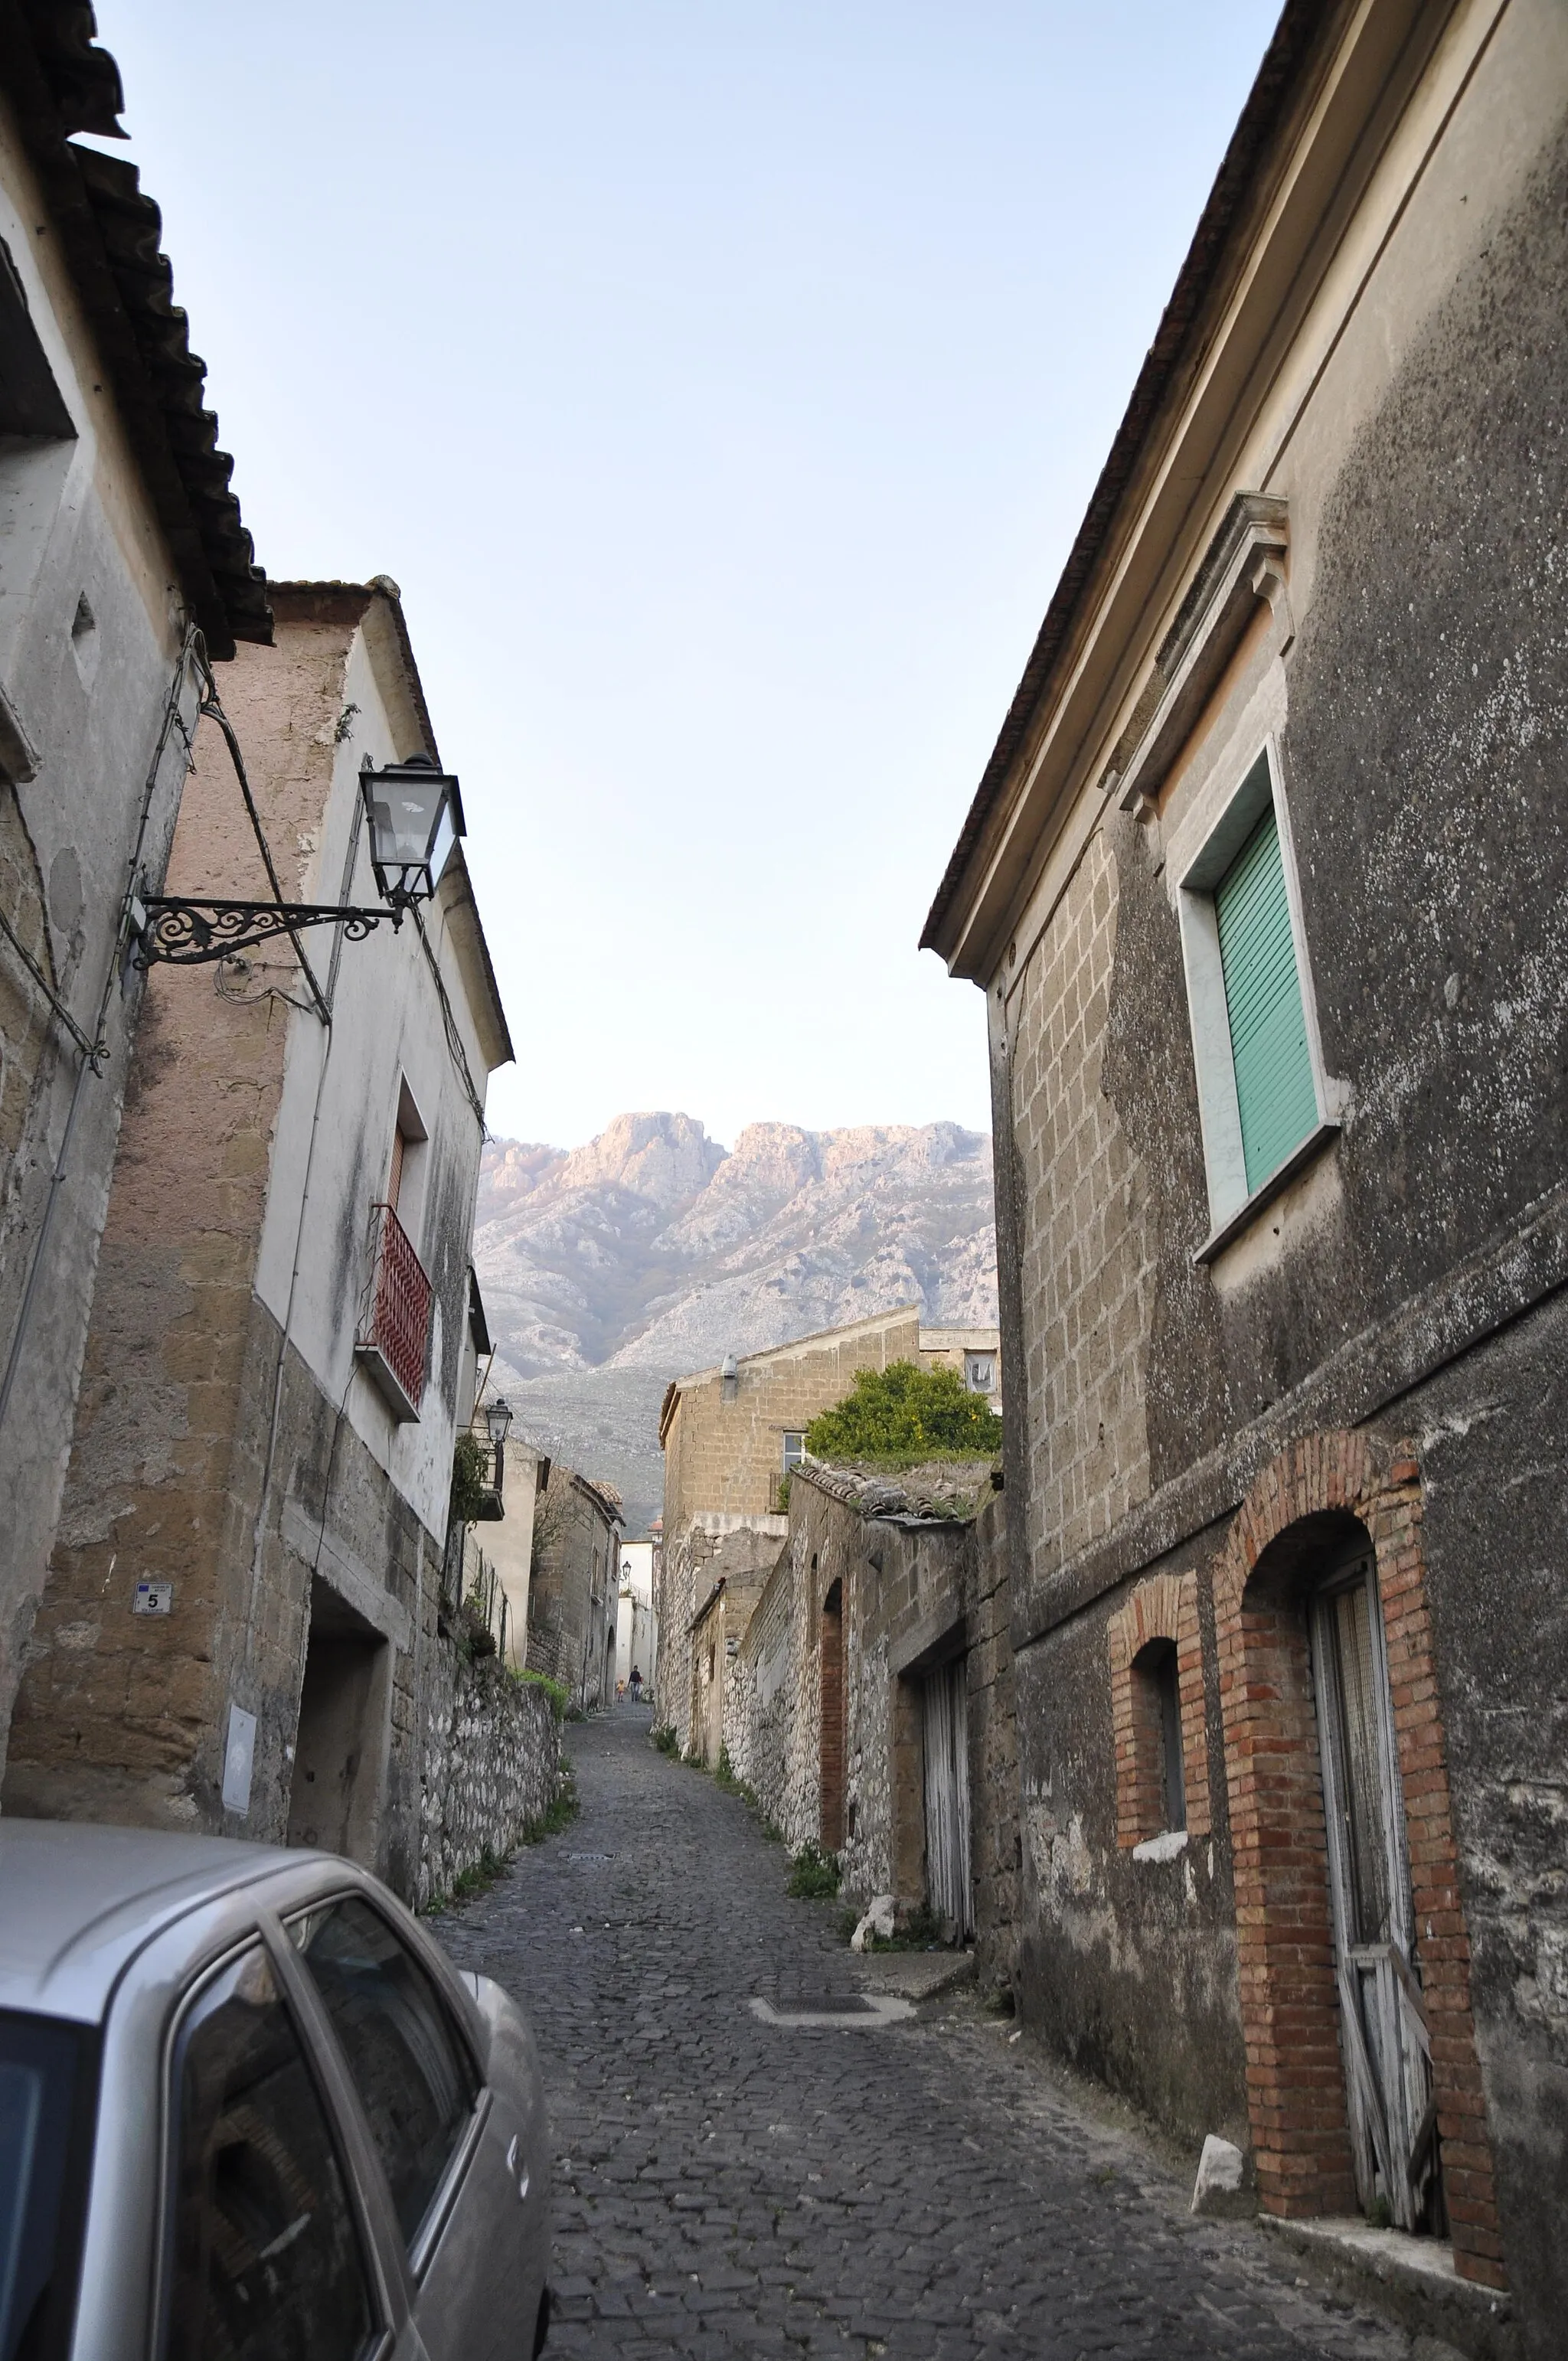 Photo showing: A street of Bonea, a comune in the province of Benevento.